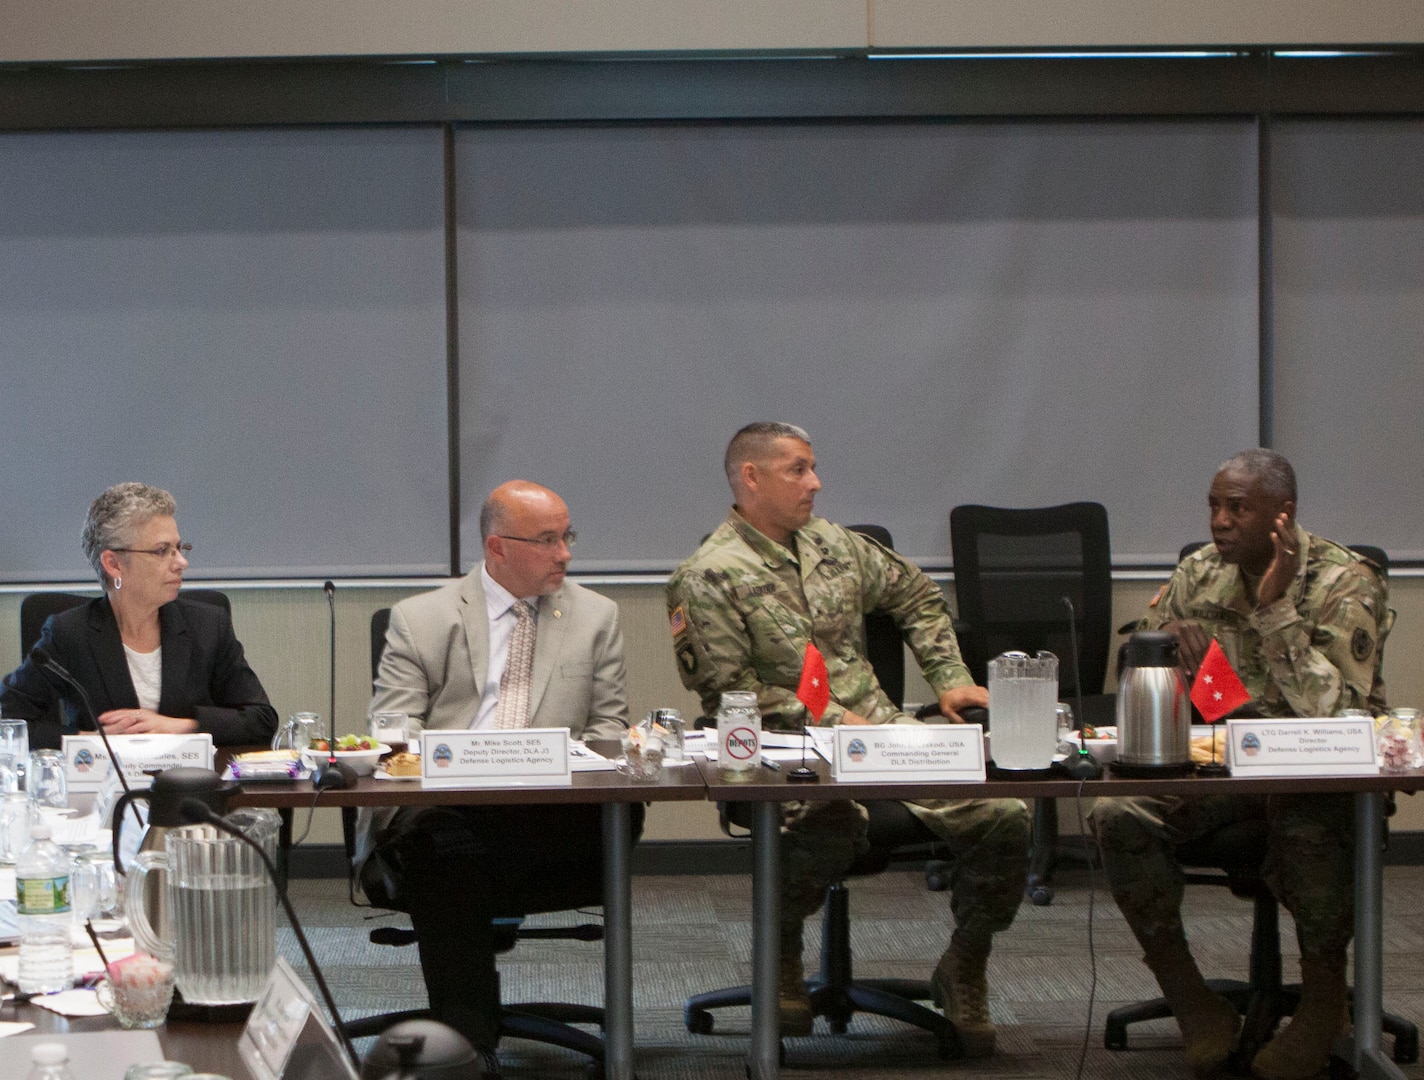 Defense Logistics Agency Director Army Lt. Gen. Darrell K. Williams visits DLA Distribution headquarters in New Cumberland, Pennsylvania, for an orientation meeting with senior leaders July 7.